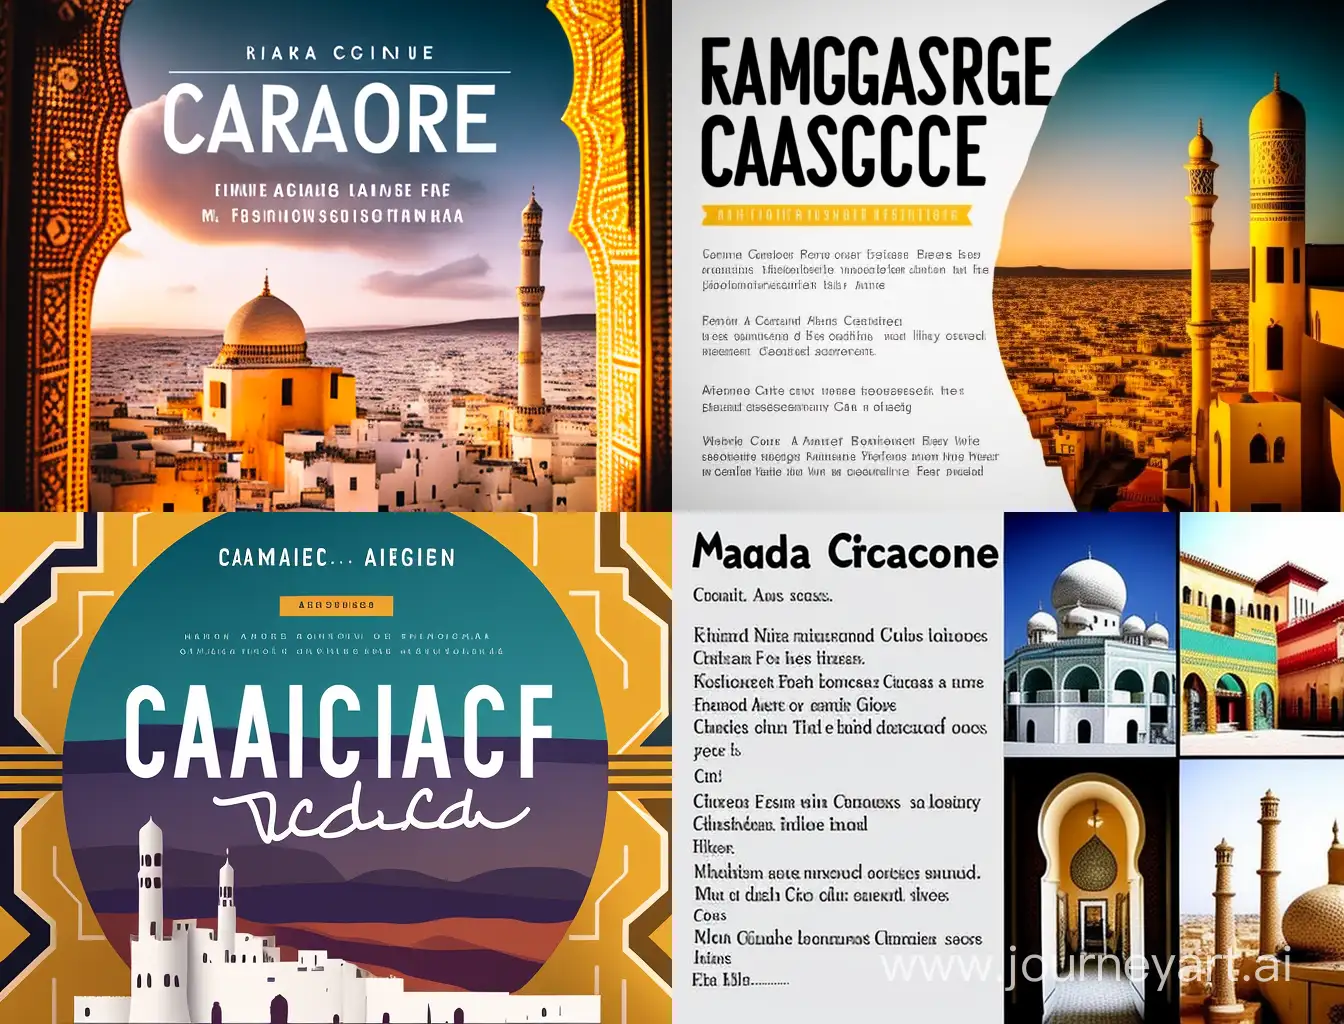 I'd like a creative, high-definition visual featuring the four main cities of Morocco: Rabat, Fes, Casablanca, and Tangier. Explore unique and imaginative interpretations of these cities by incorporating iconic elements such as the Hassan Tower for Rabat, the Medina of Fes, the Hassan II Mosque for Casablanca, and the Cape Spartel for Tangier. Encourage creativity by integrating surreal or futuristic elements that captivate the eye and spark curiosity. The goal is to create a stunning visual that celebrates the cultural richness and diversity of these Moroccan cities in a new and unexpected way